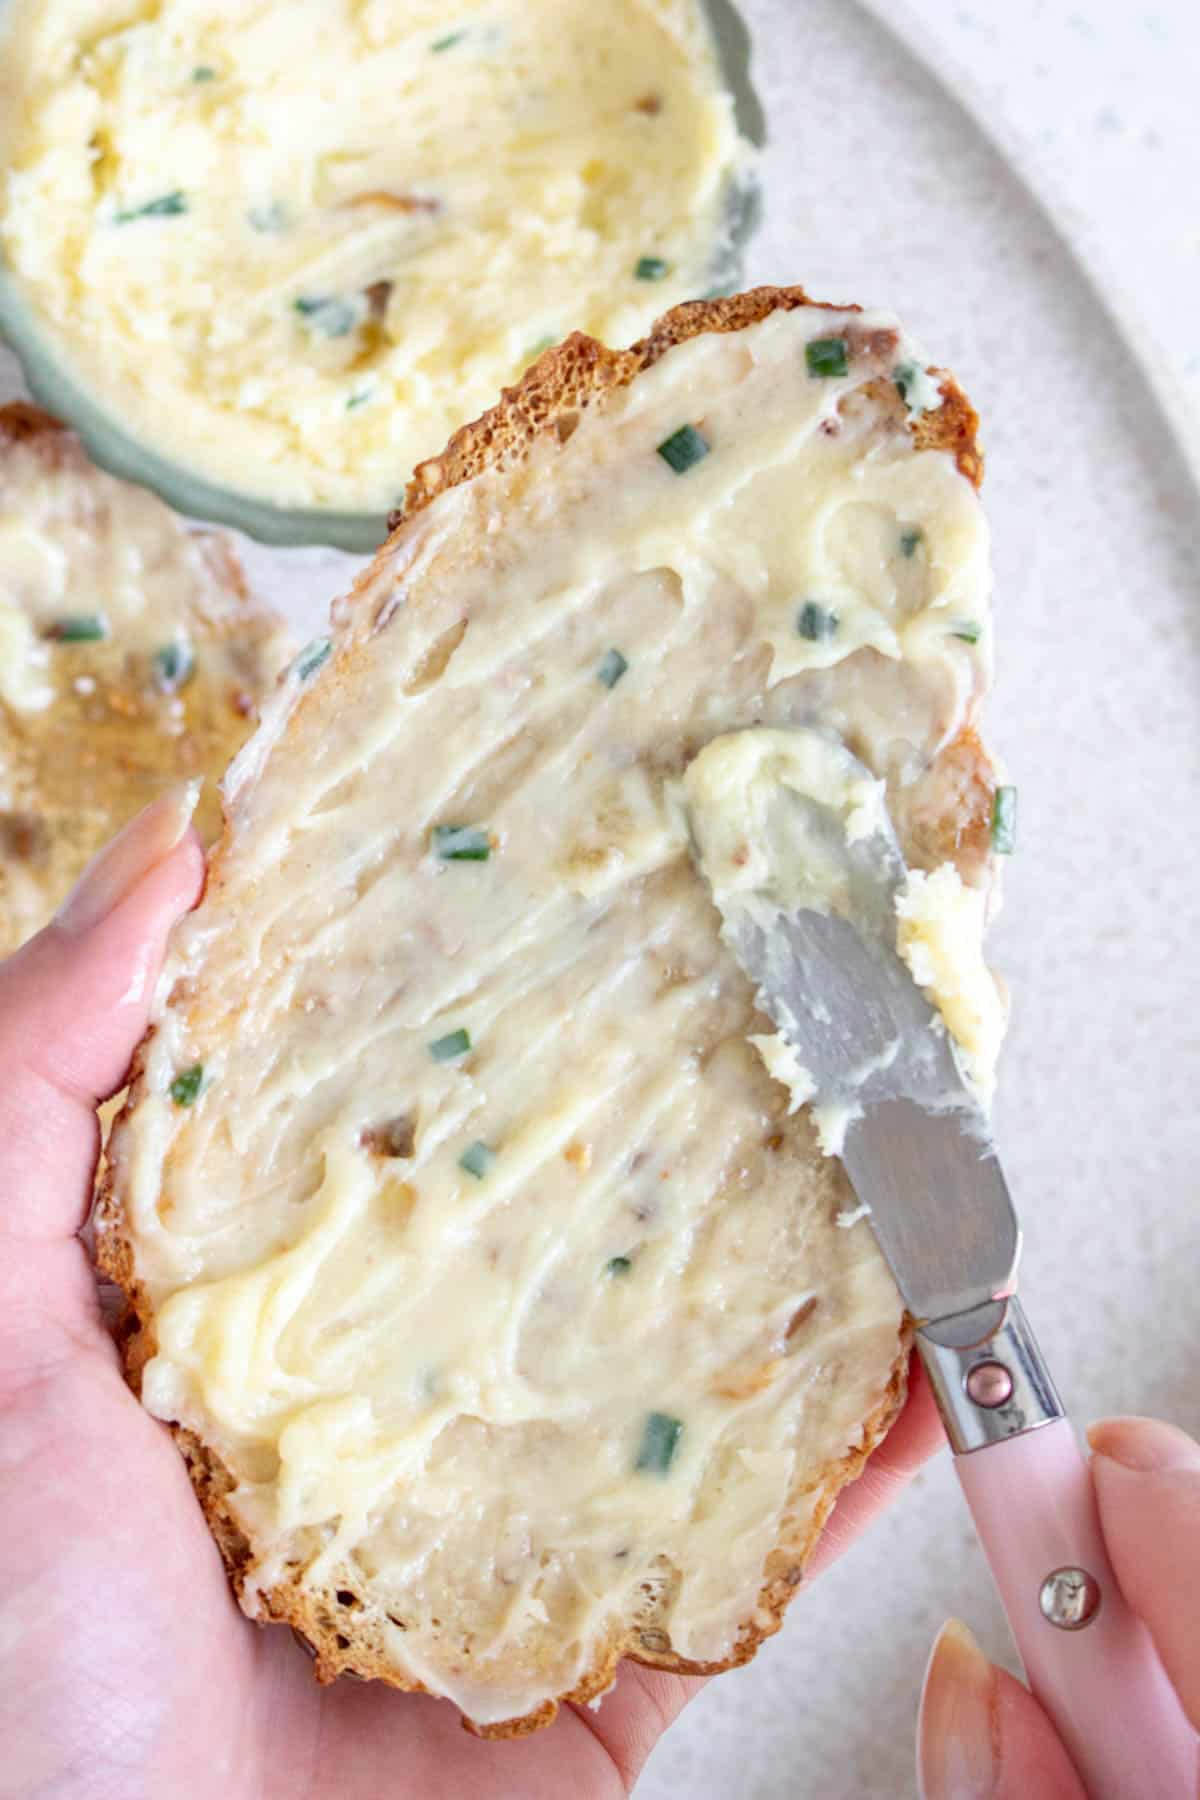 Roasted garlic butter spread onto a piece of toast.